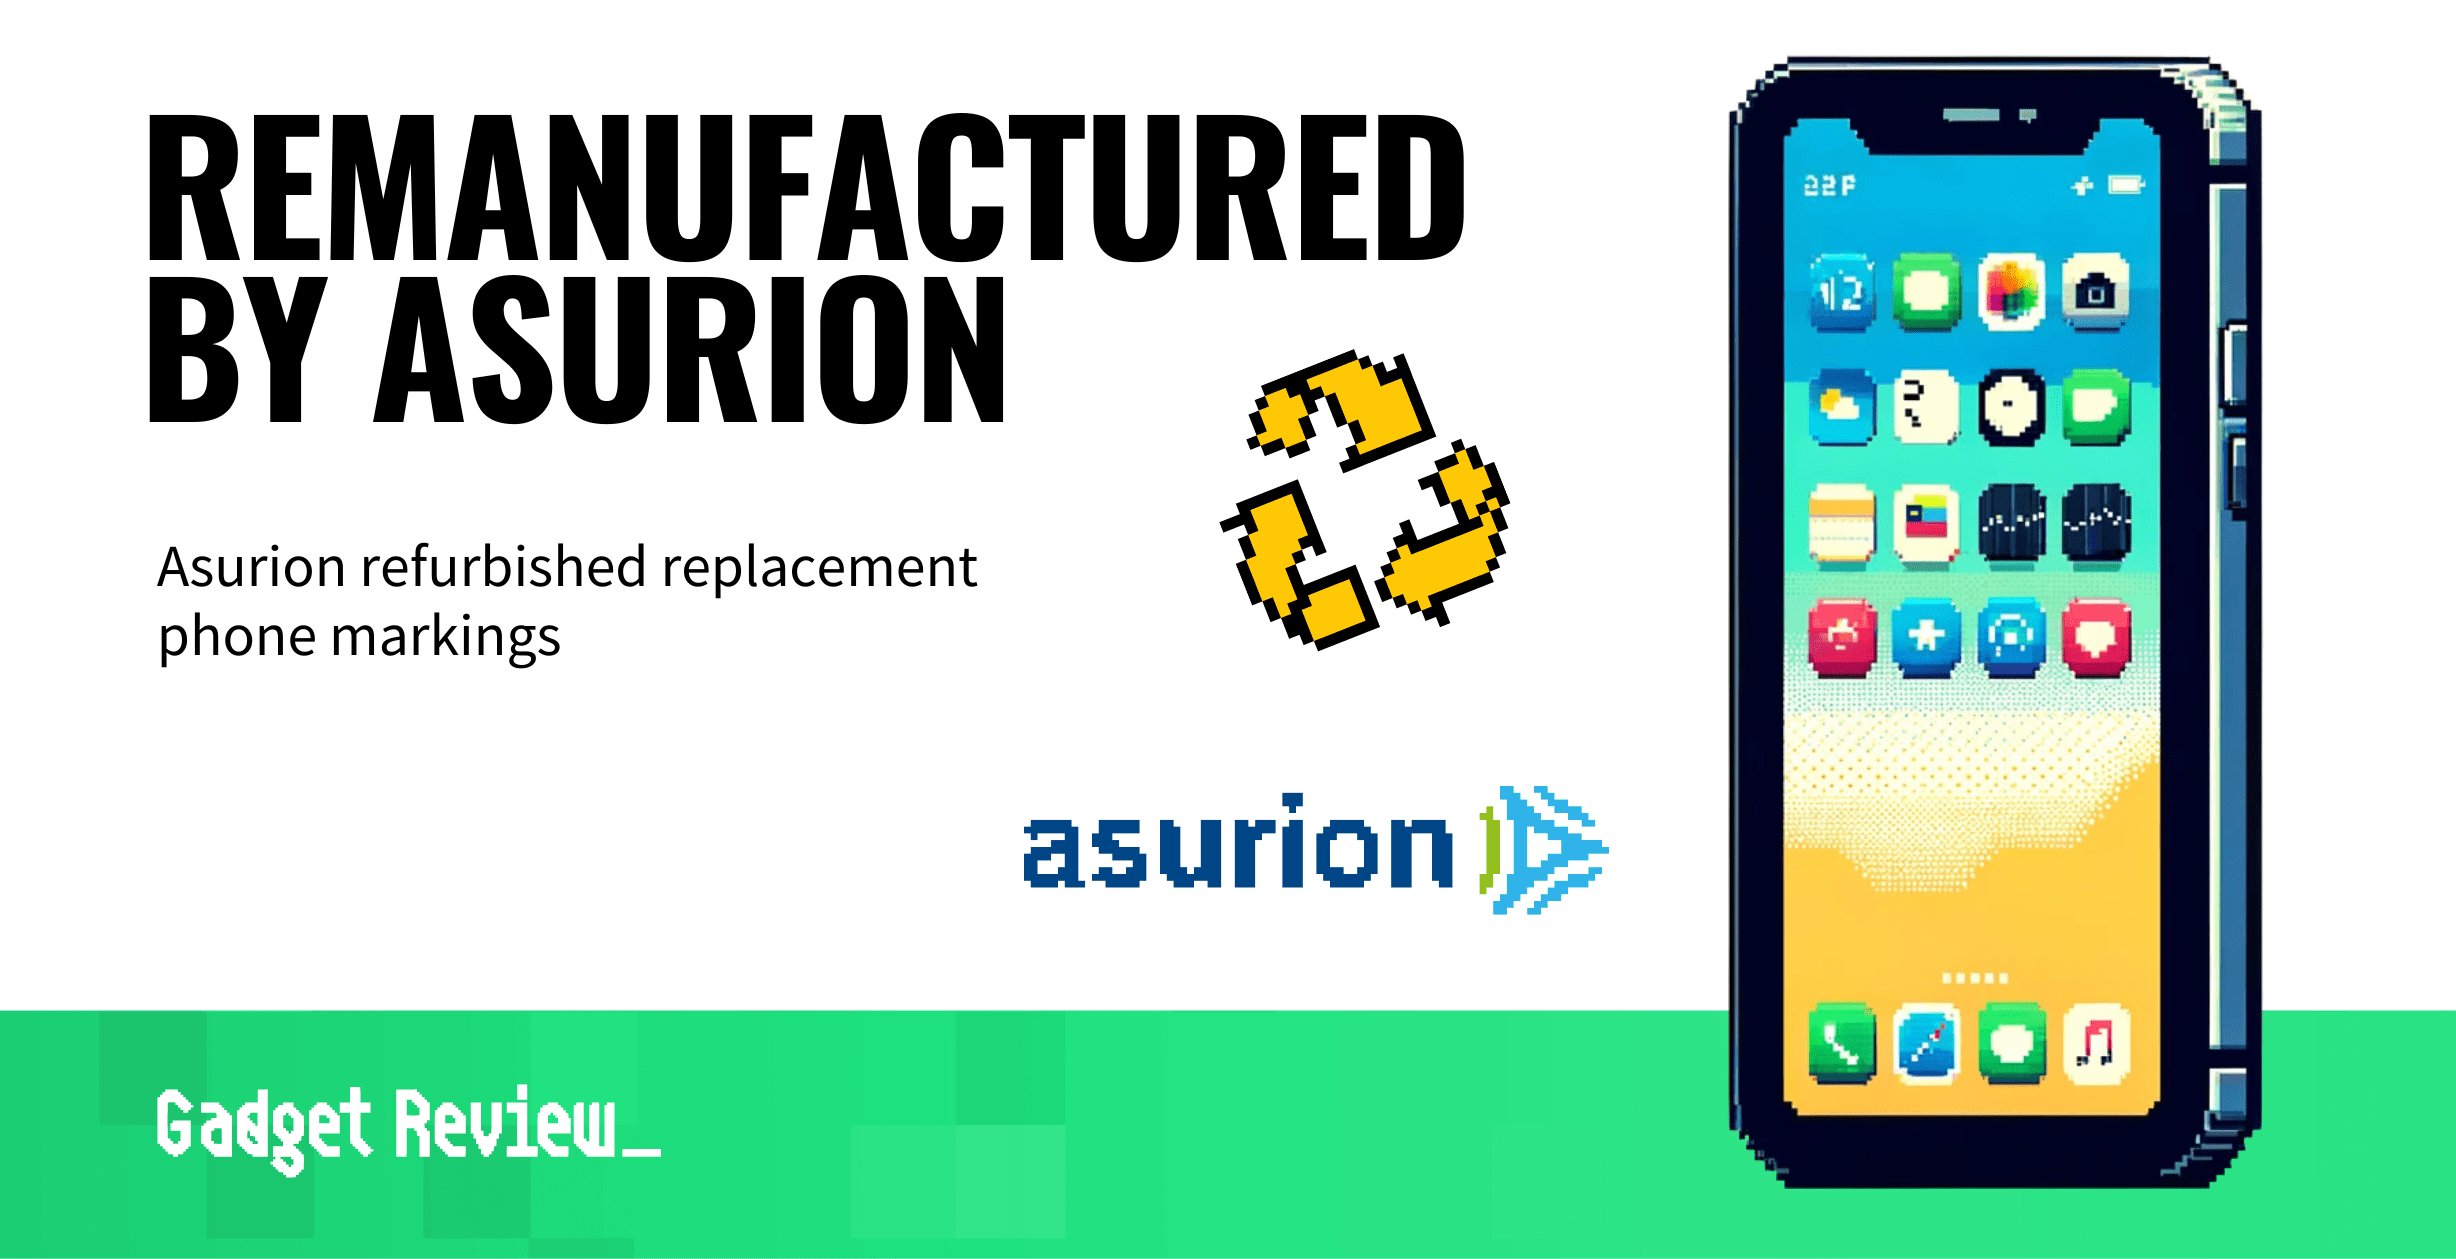 remanufactured by asurion guide